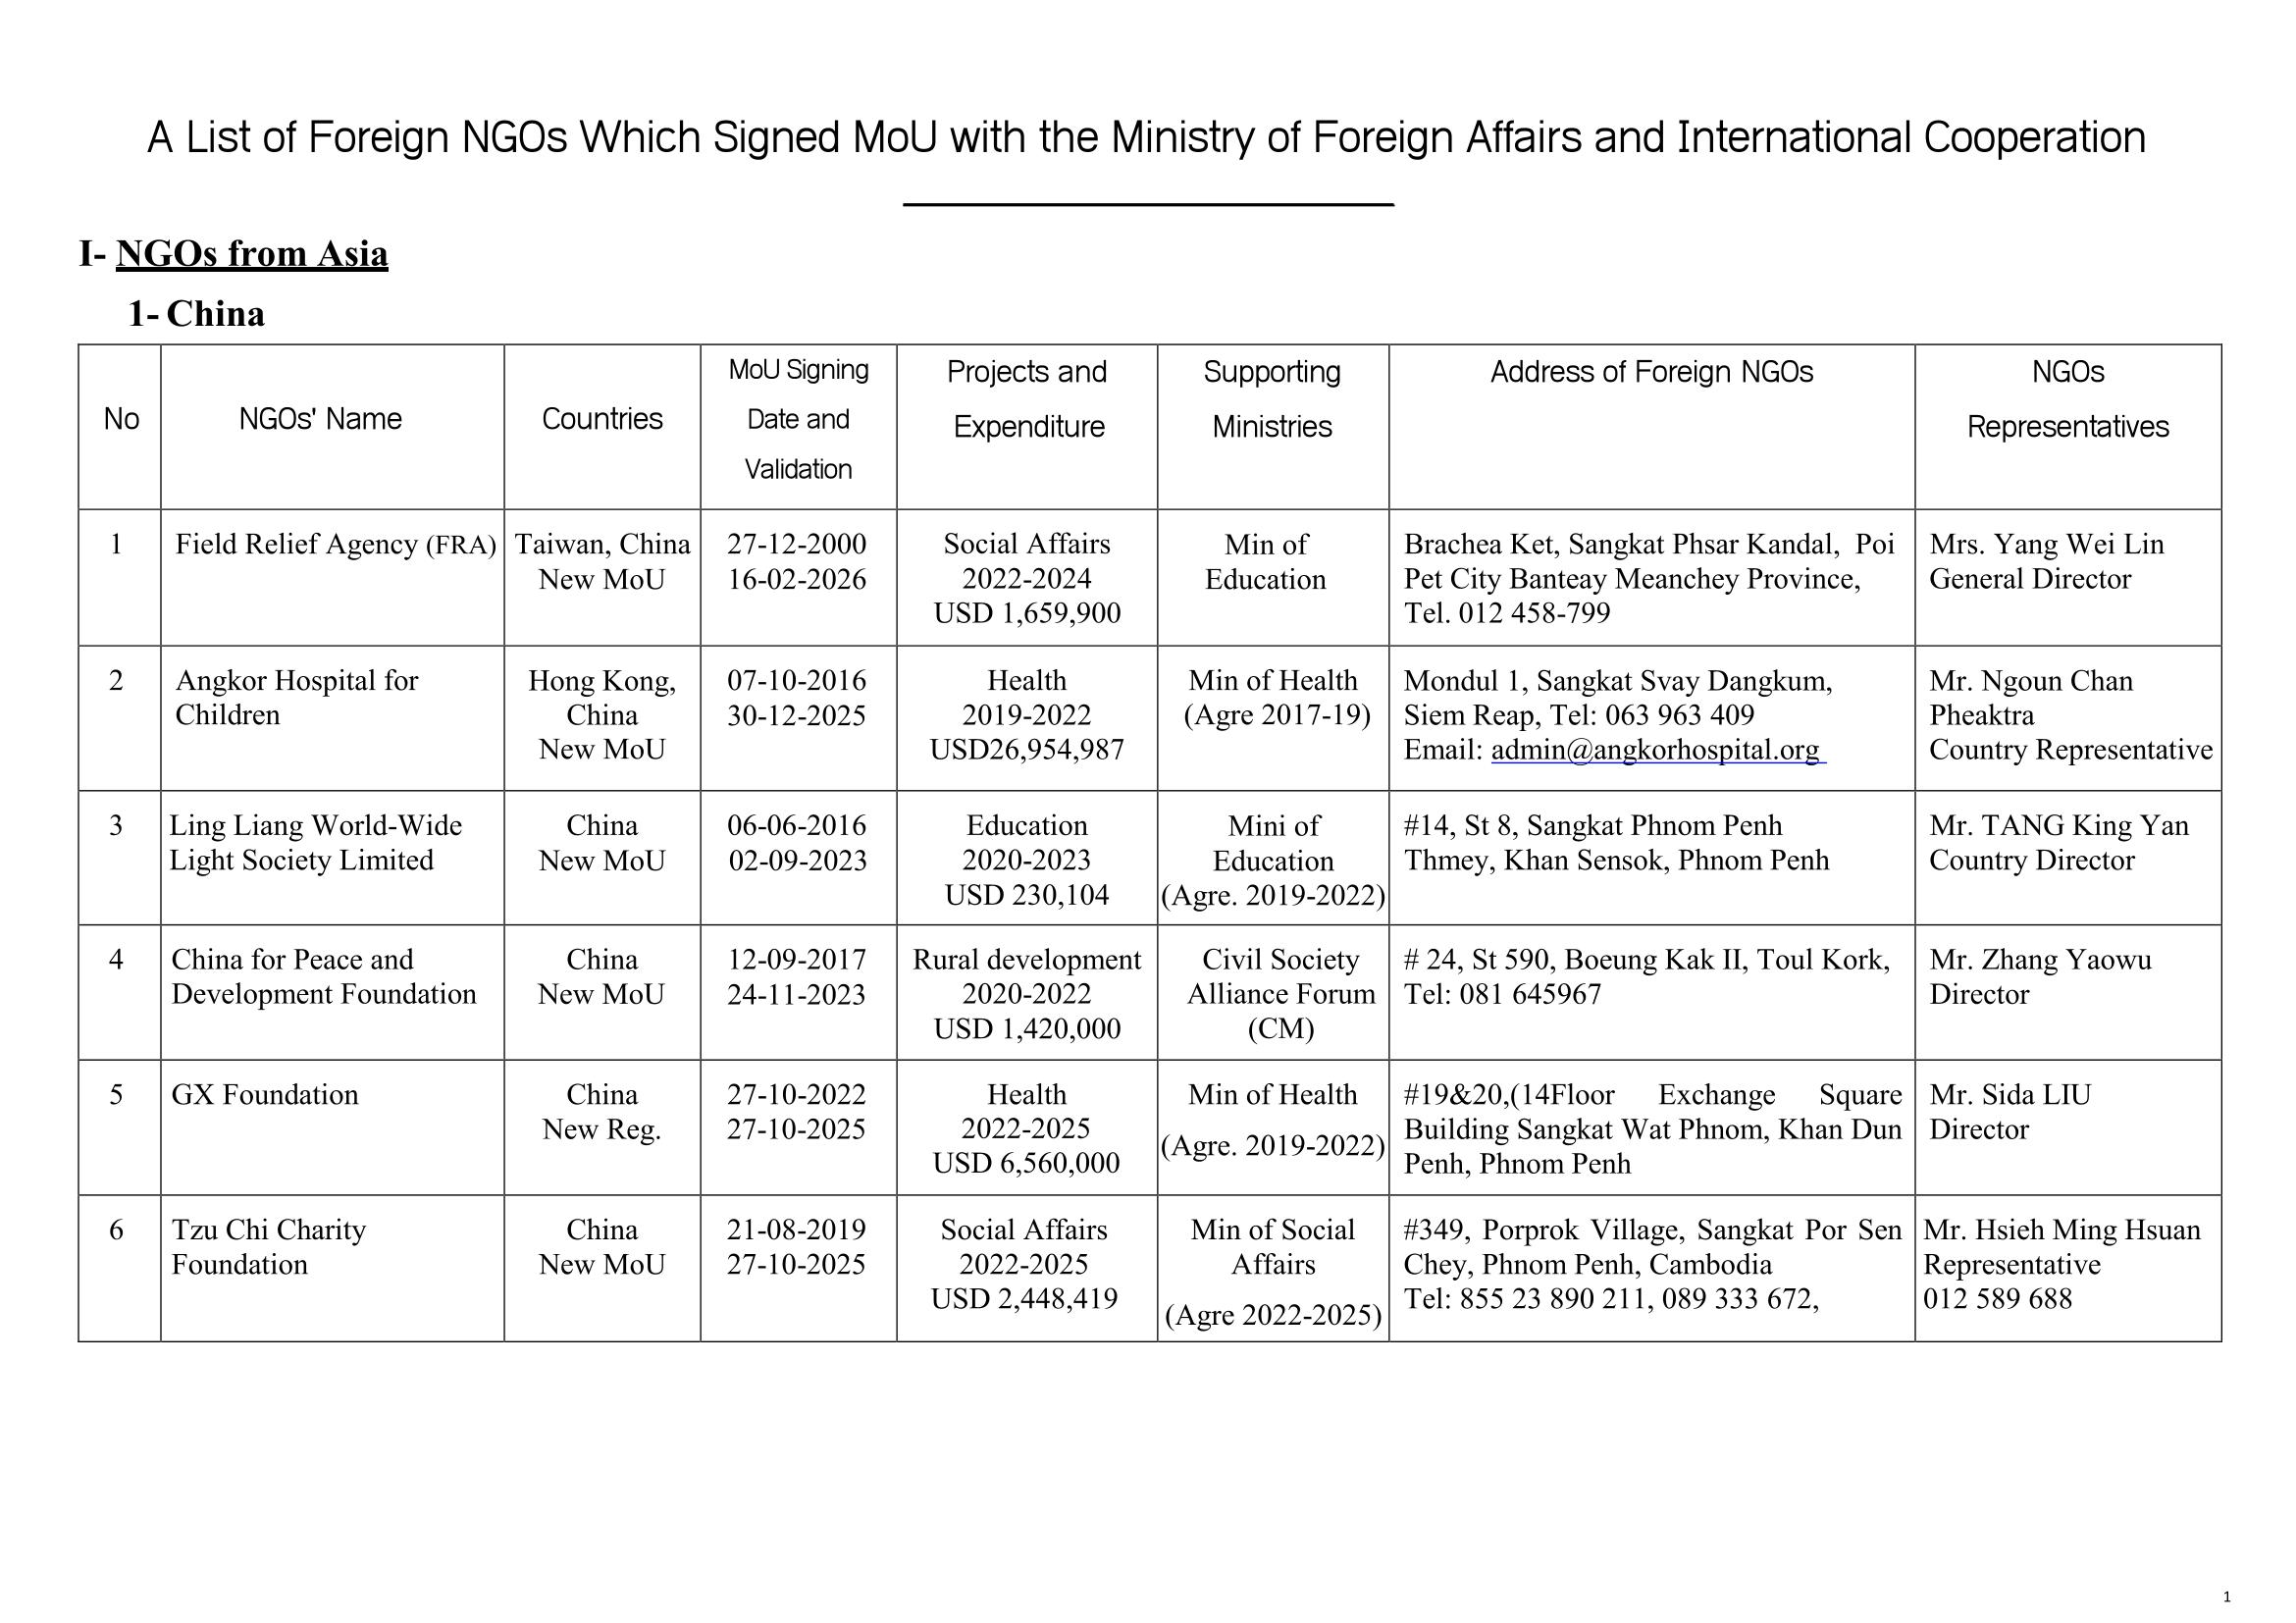 List of Foreign NGOs Which Signed MoU with the Ministry of Foreign Affairs and International Cooperation)